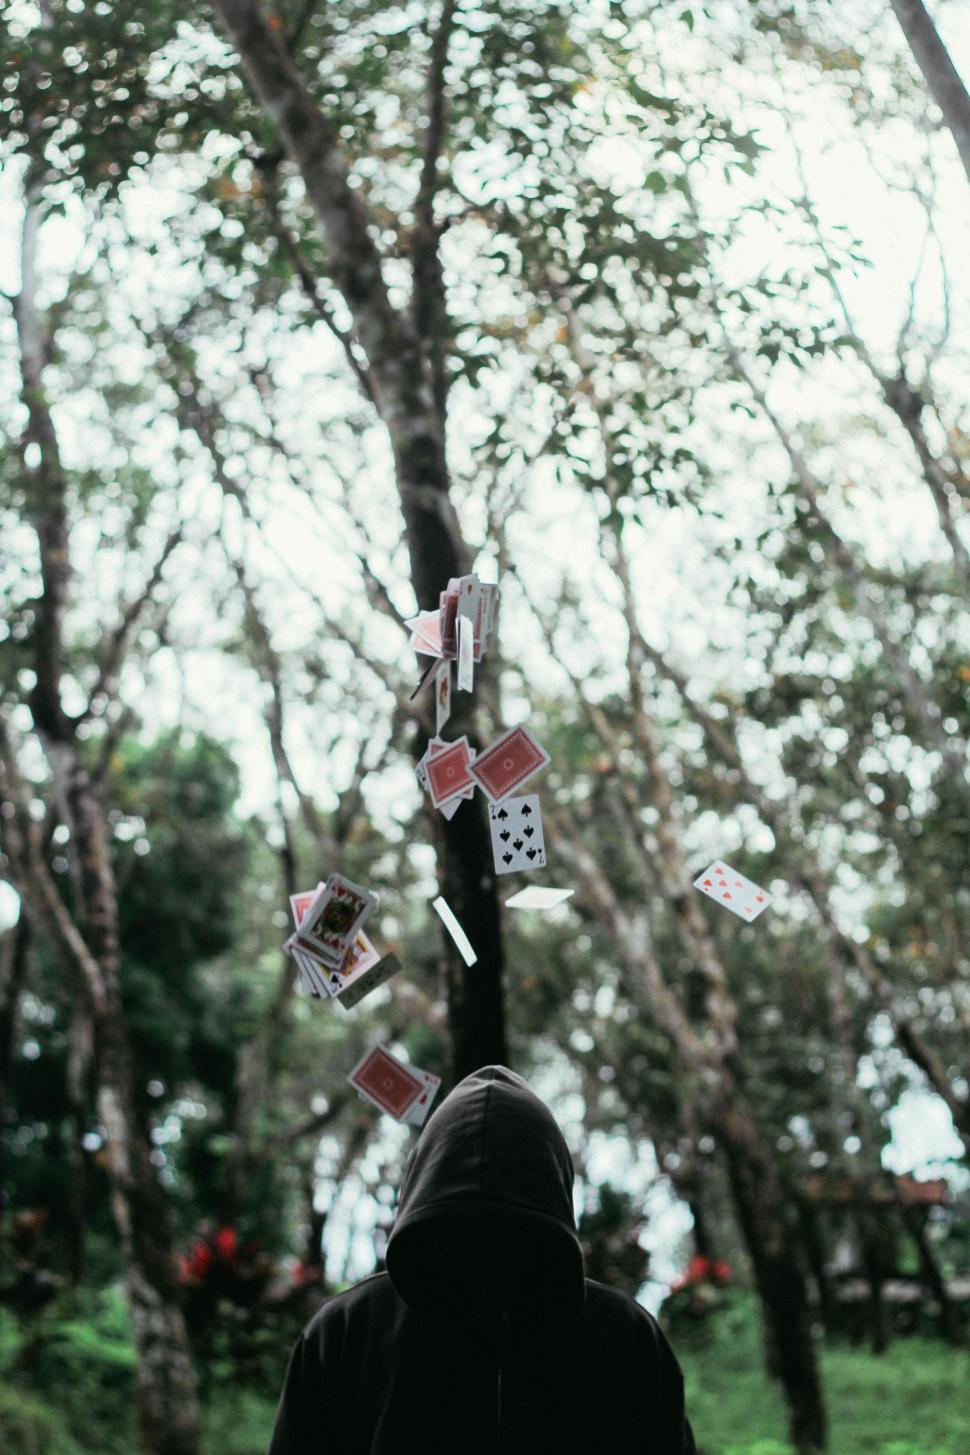 Free Image of Person Standing in Front of Tree With Falling Playing Cards 